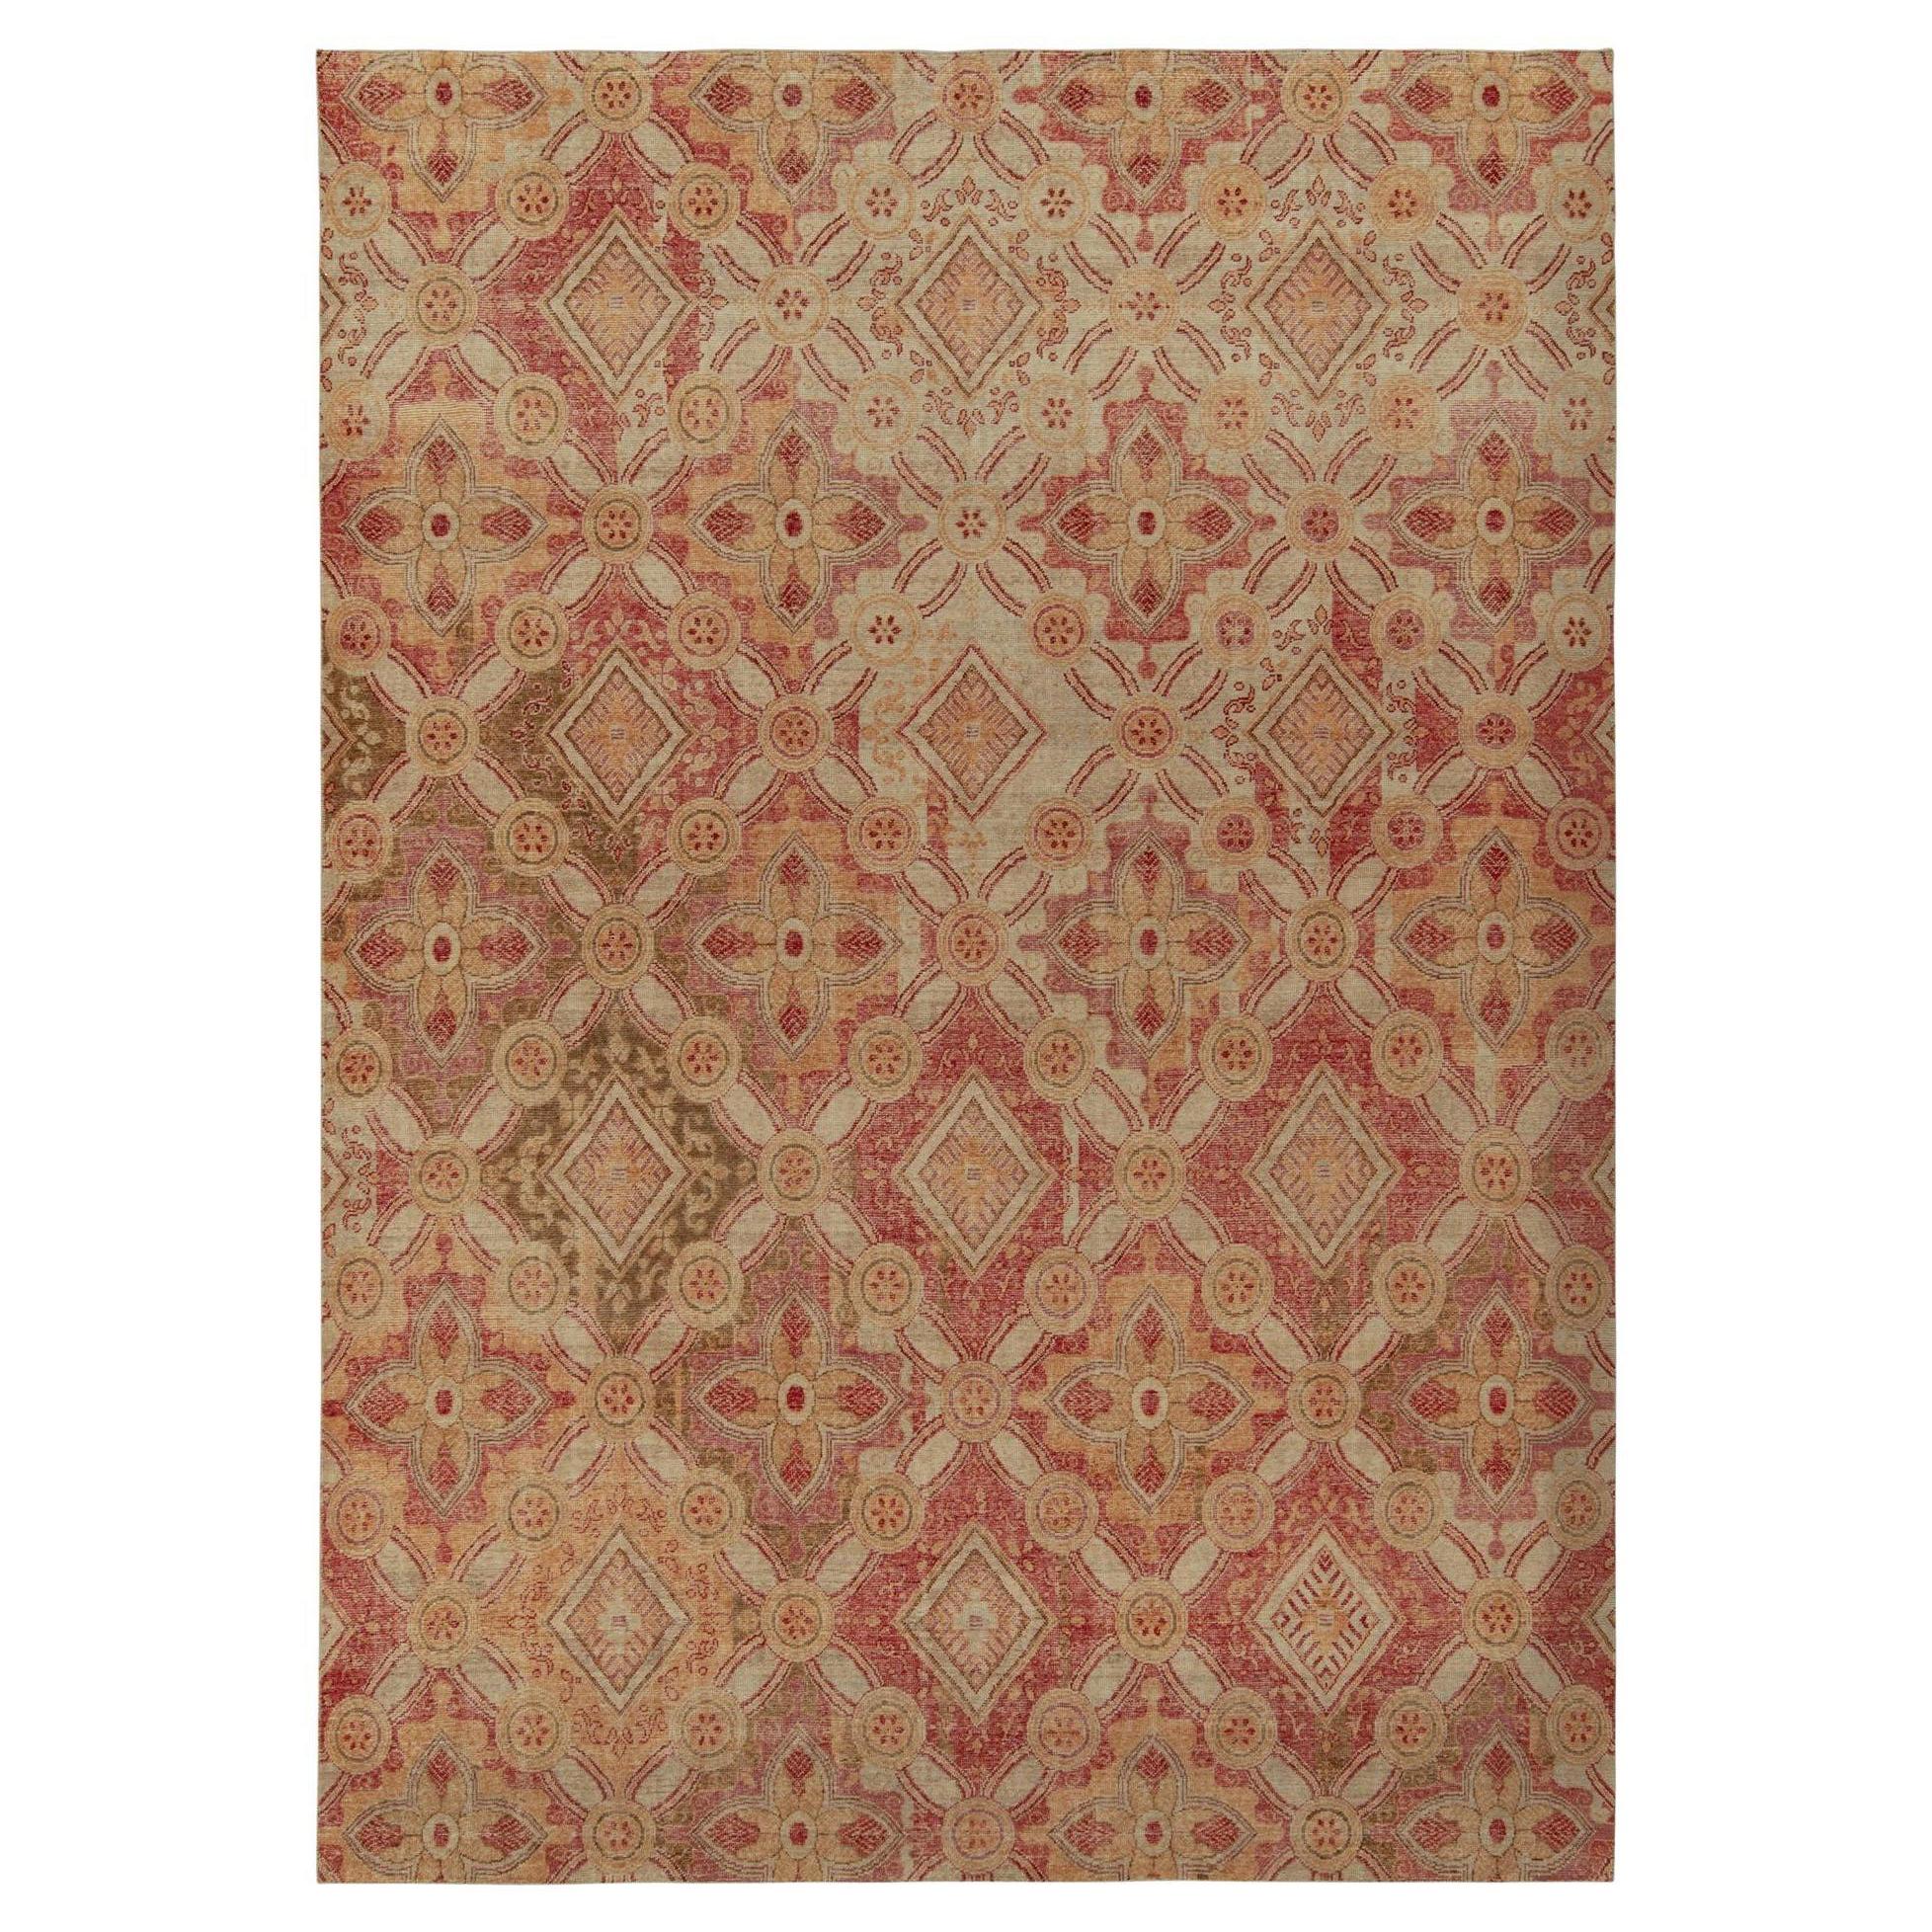 Rug & Kilim’s Distressed Style Rug in Red, Gold and Beige-Brown Trellises